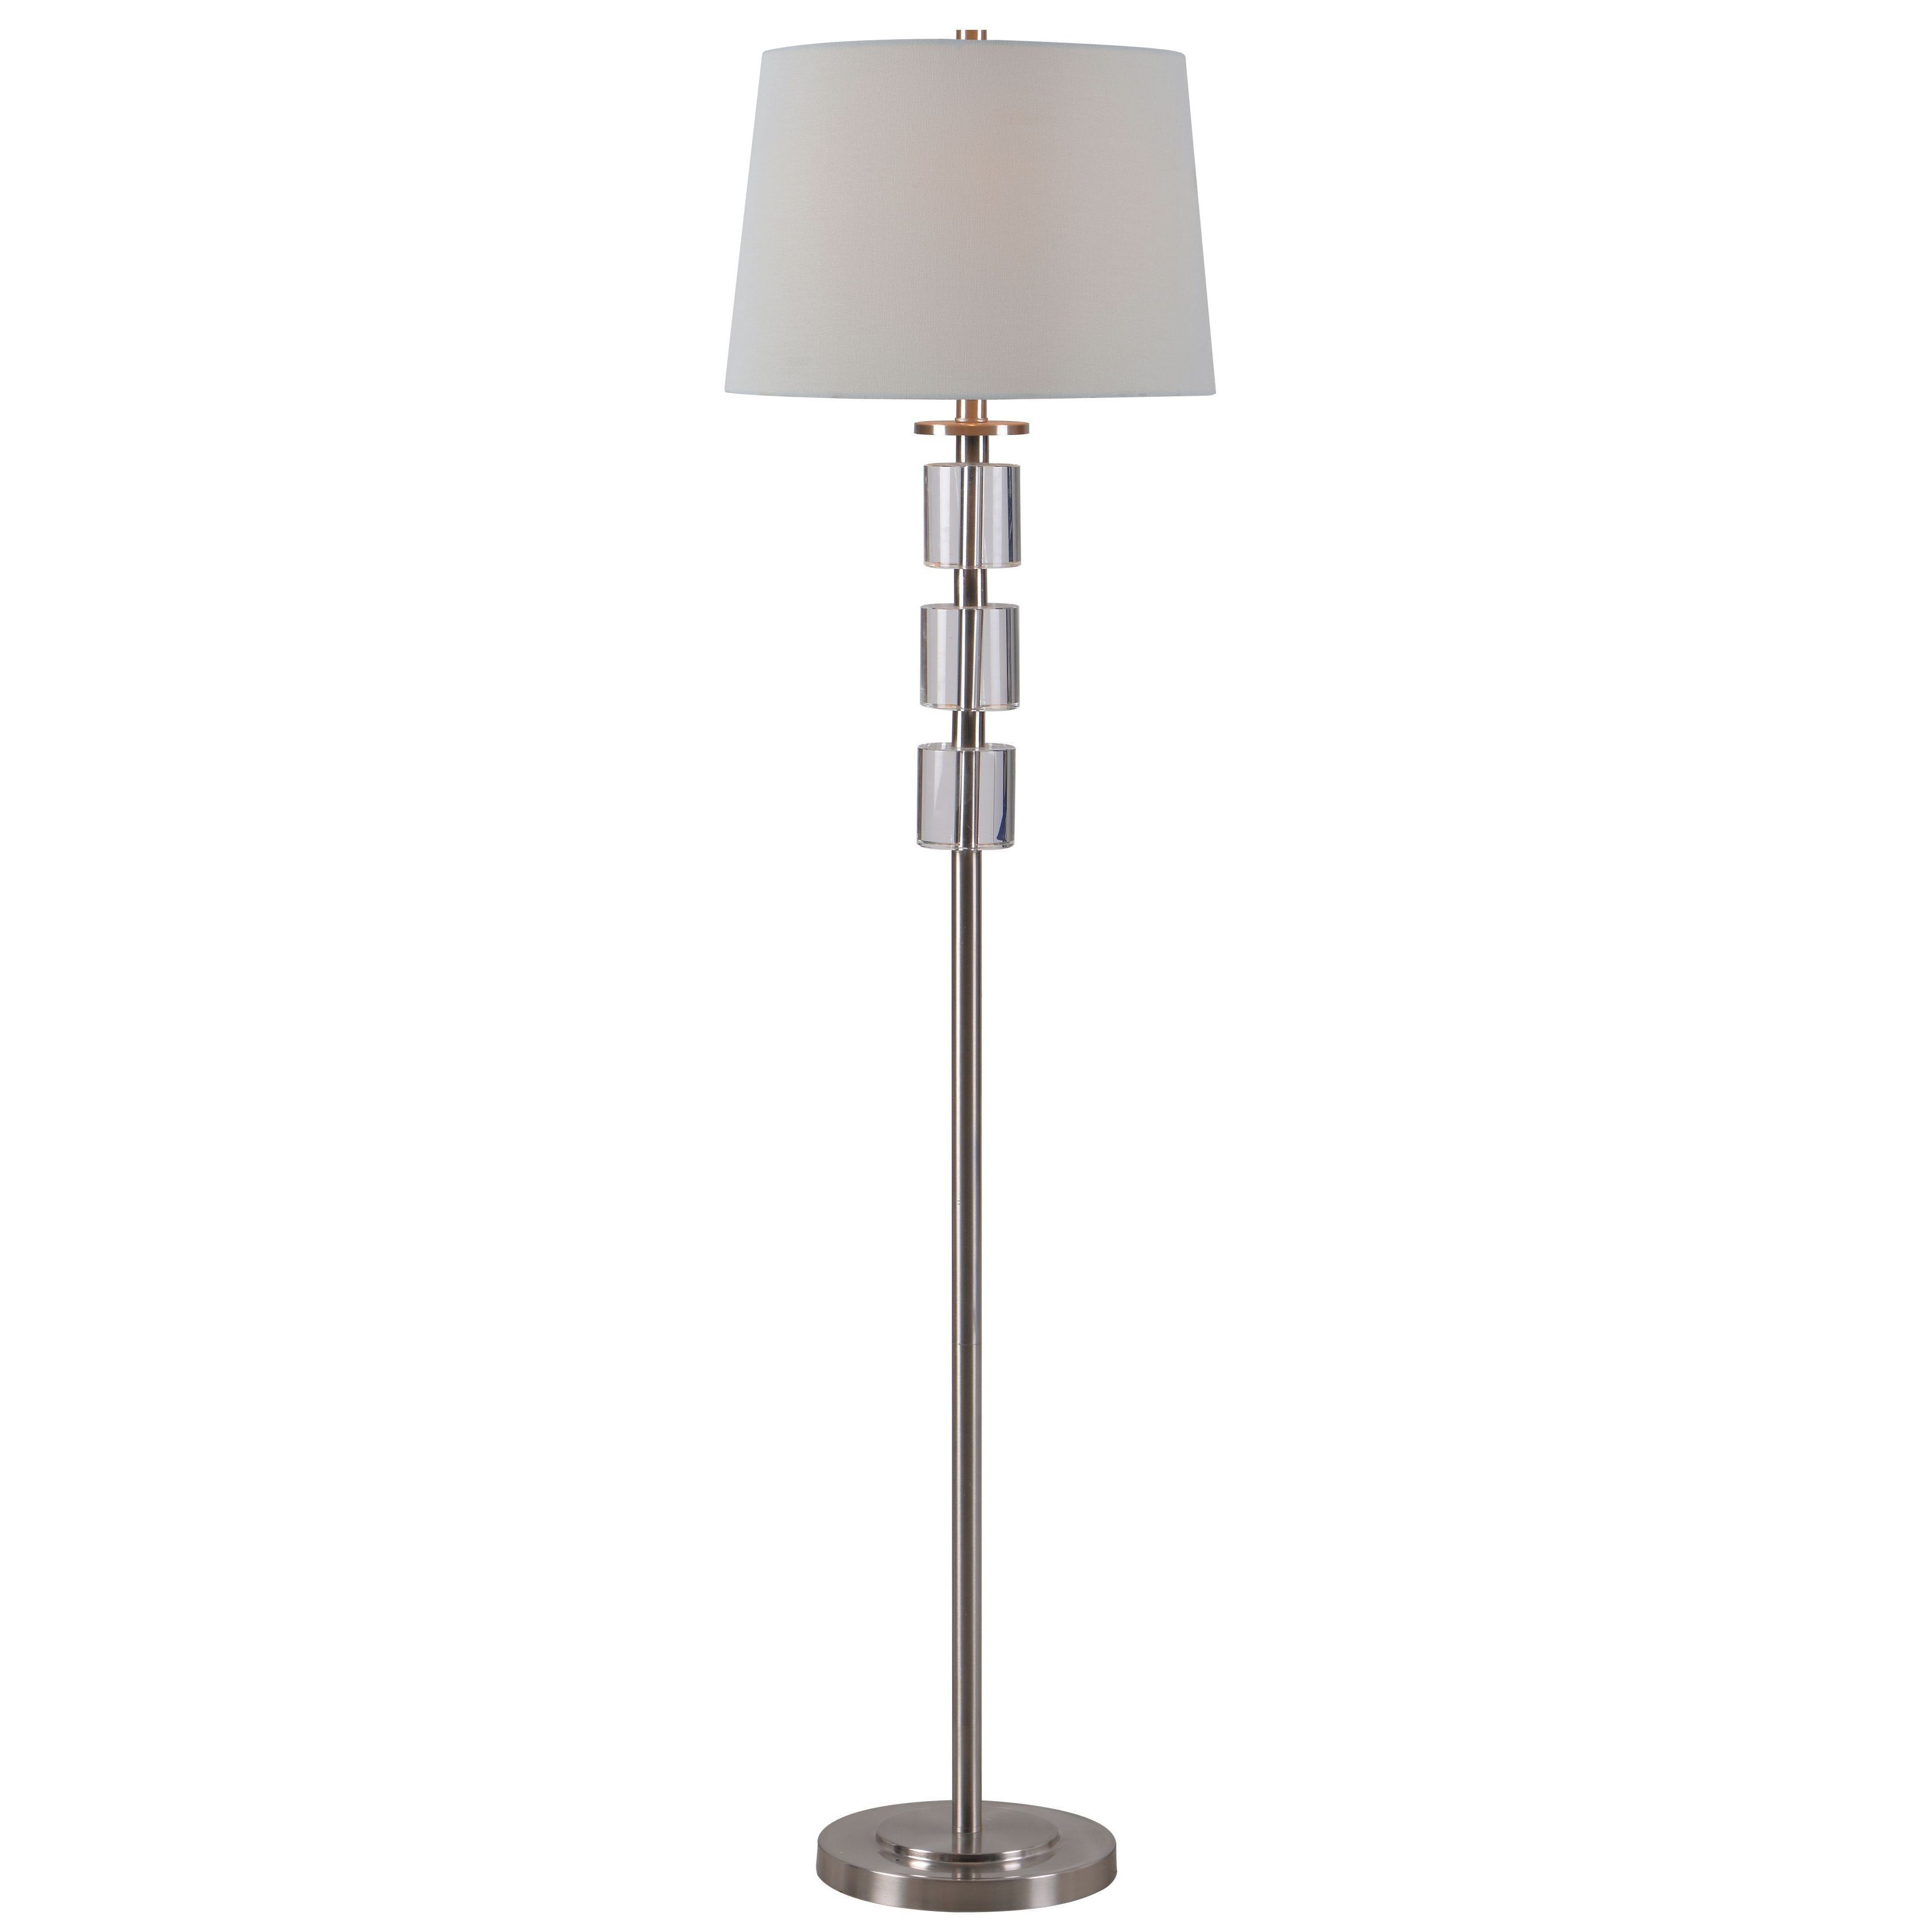 Crystal Floor Lamp Overstock Shopping The Best Deals intended for proportions 3500 X 3500